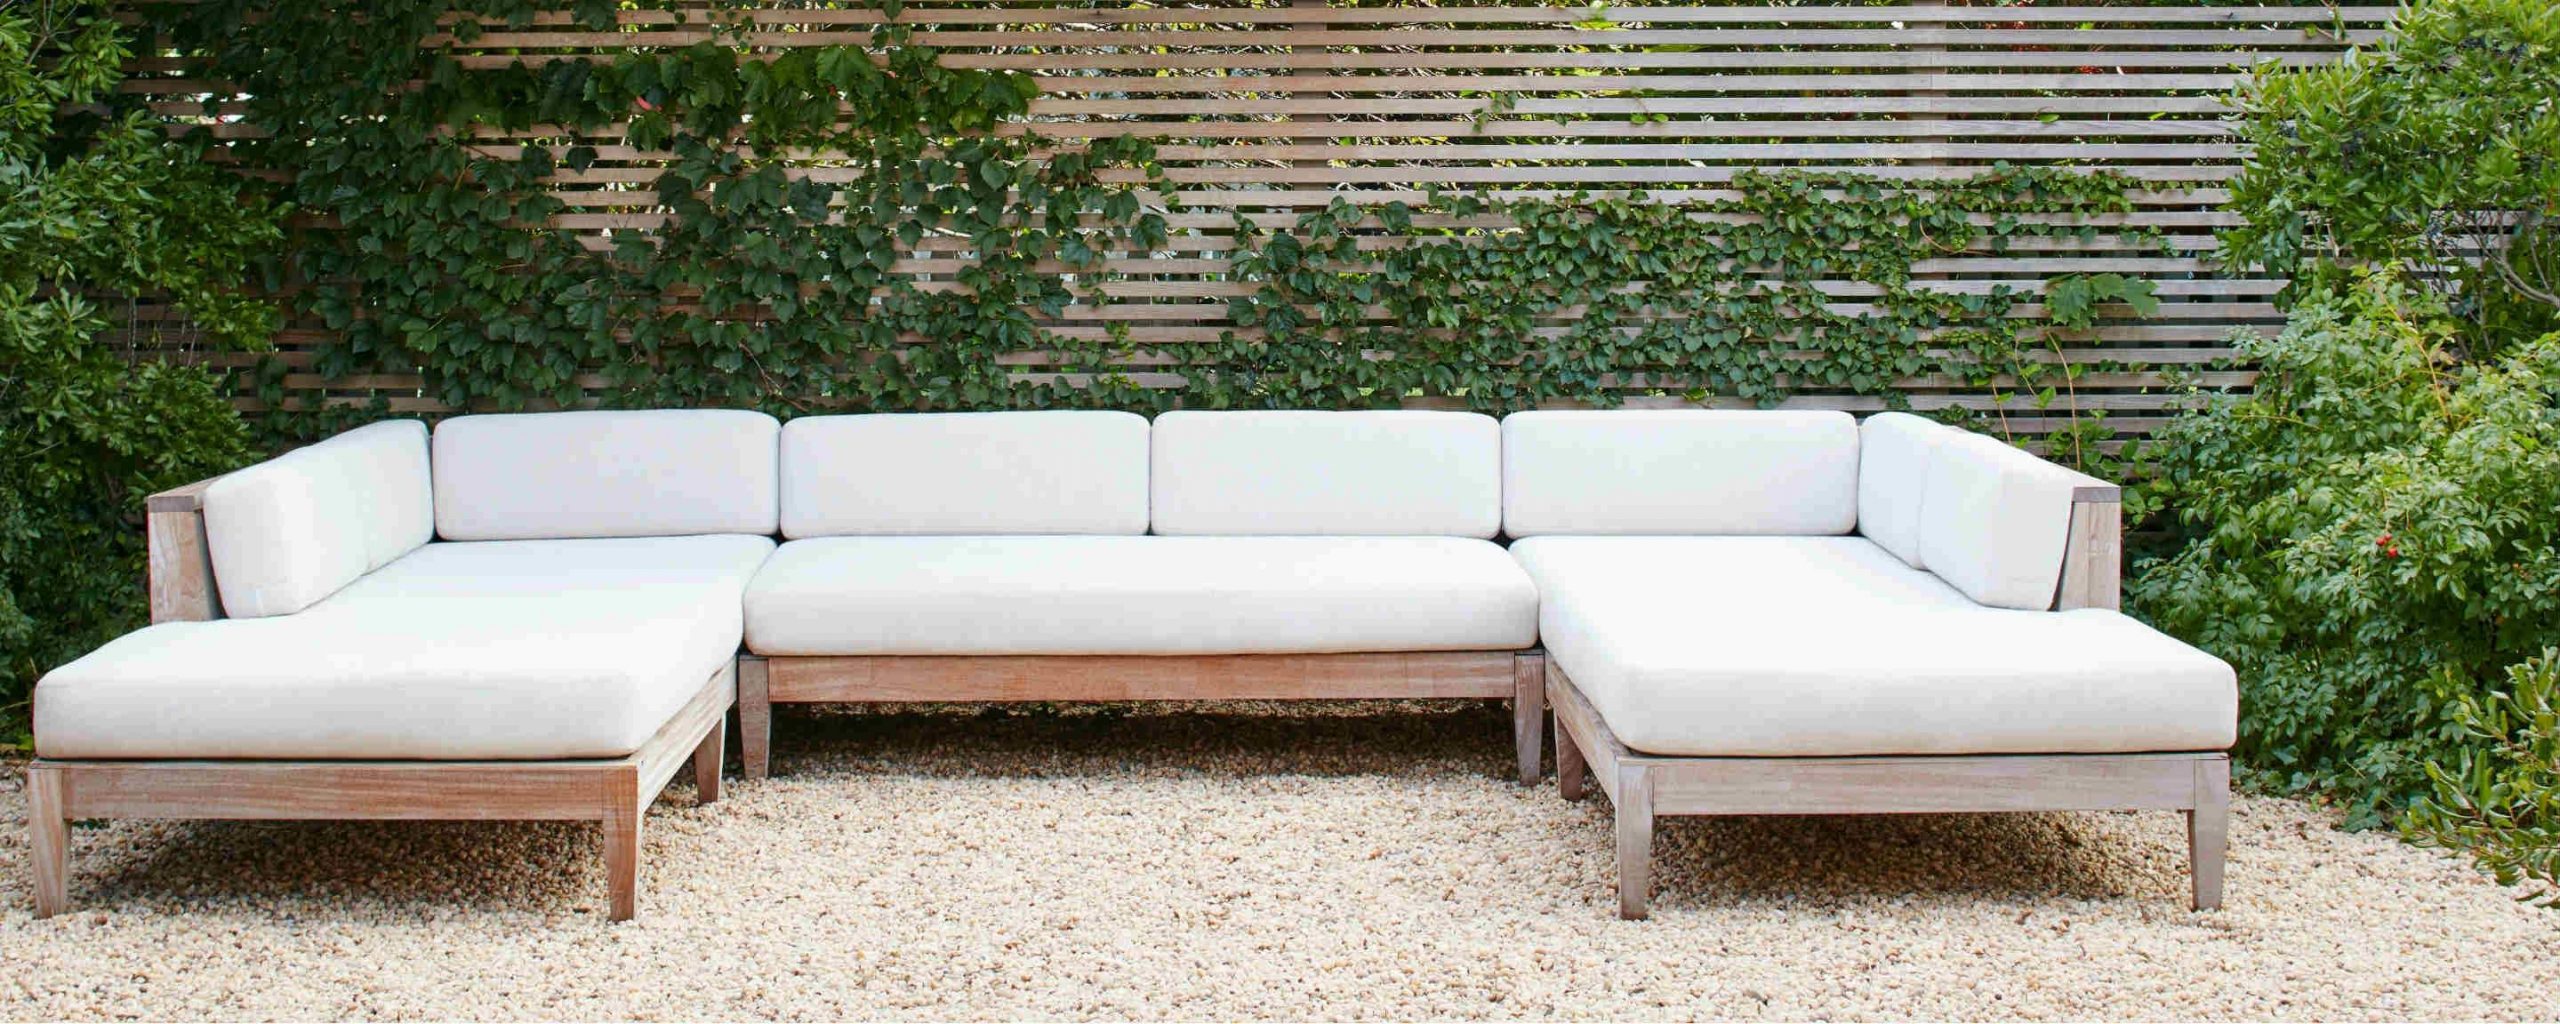 Sapele Wood Outdoor Sectional Sofa Scaled 